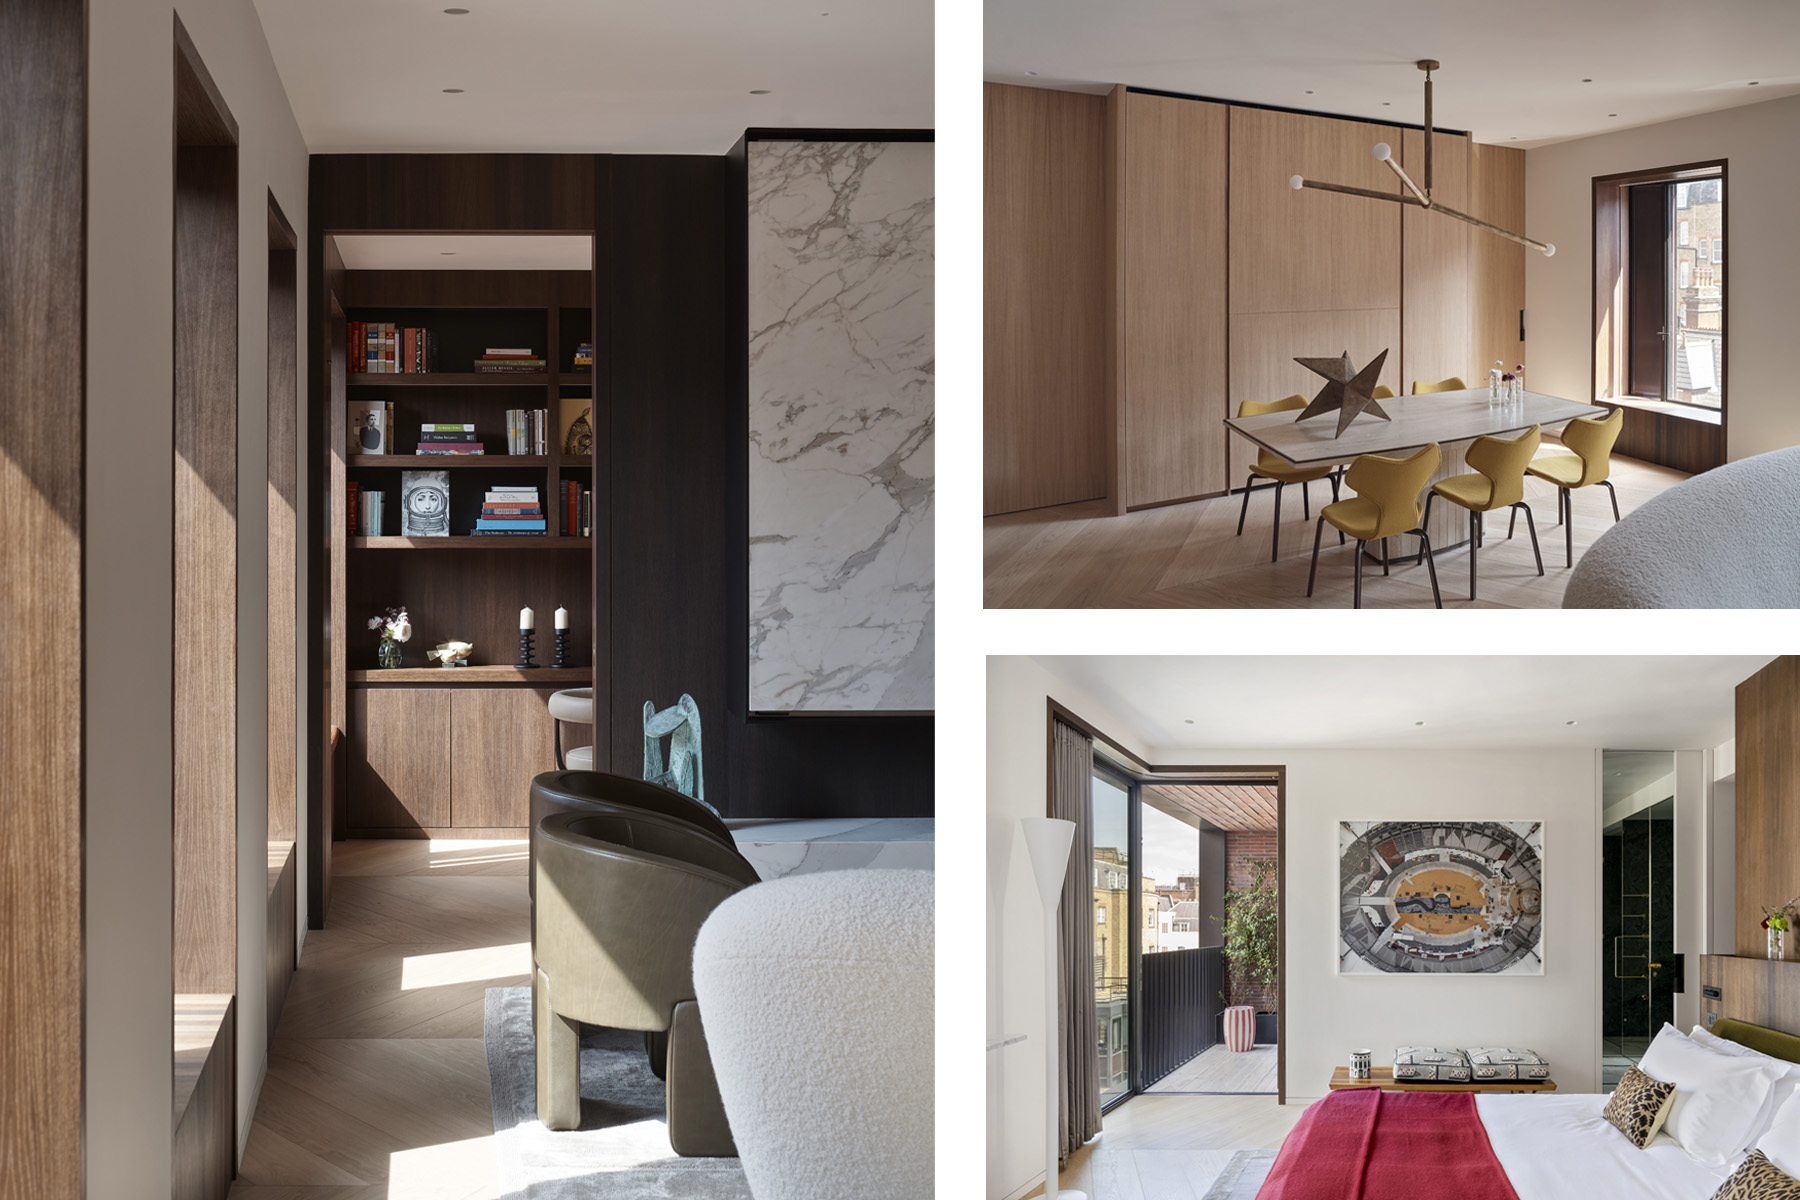 The design of each apartment interior is unique, with every item specifically procured for the look and feel of an intelligently curated contemporary urban home